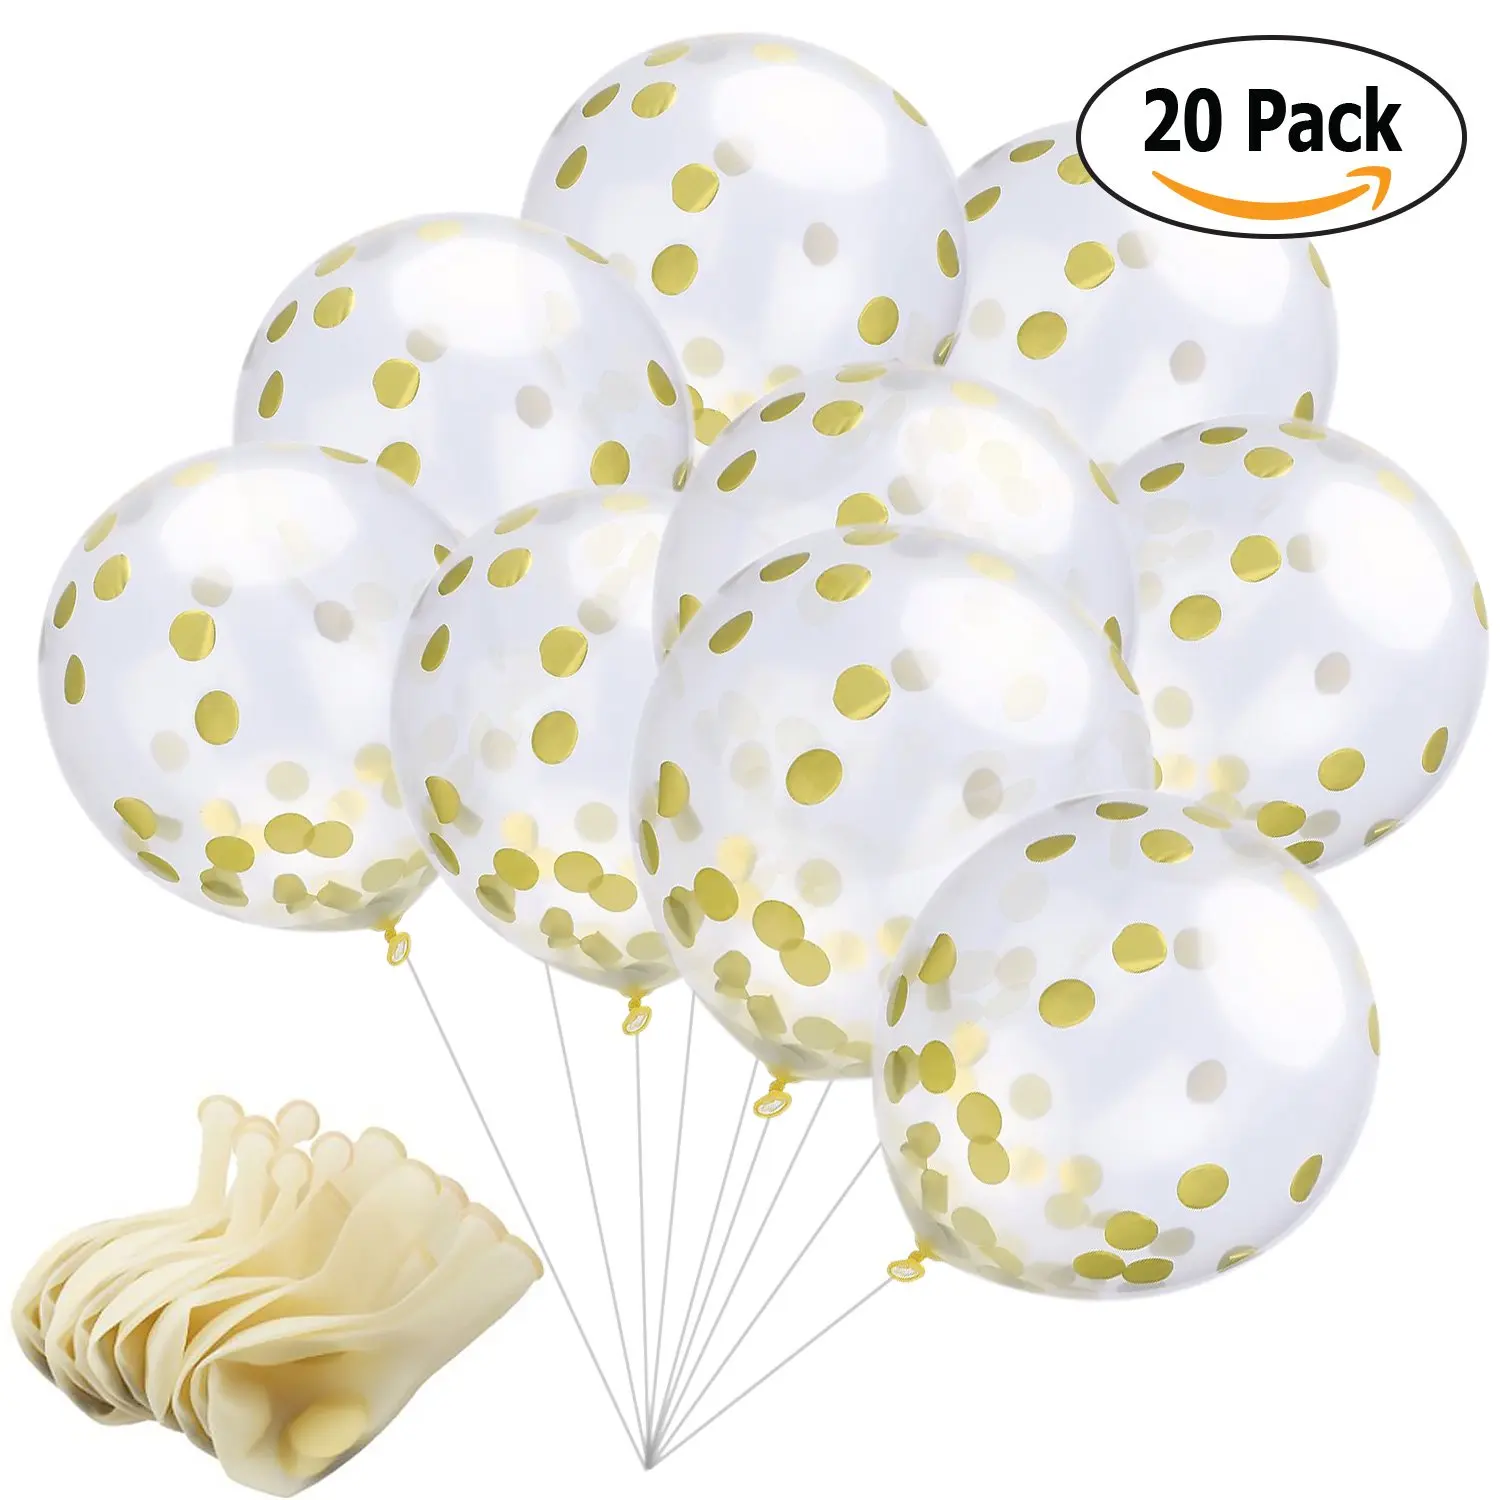 Buy Spoton 20pcs Of 12 Inches Party Balloons With Golden